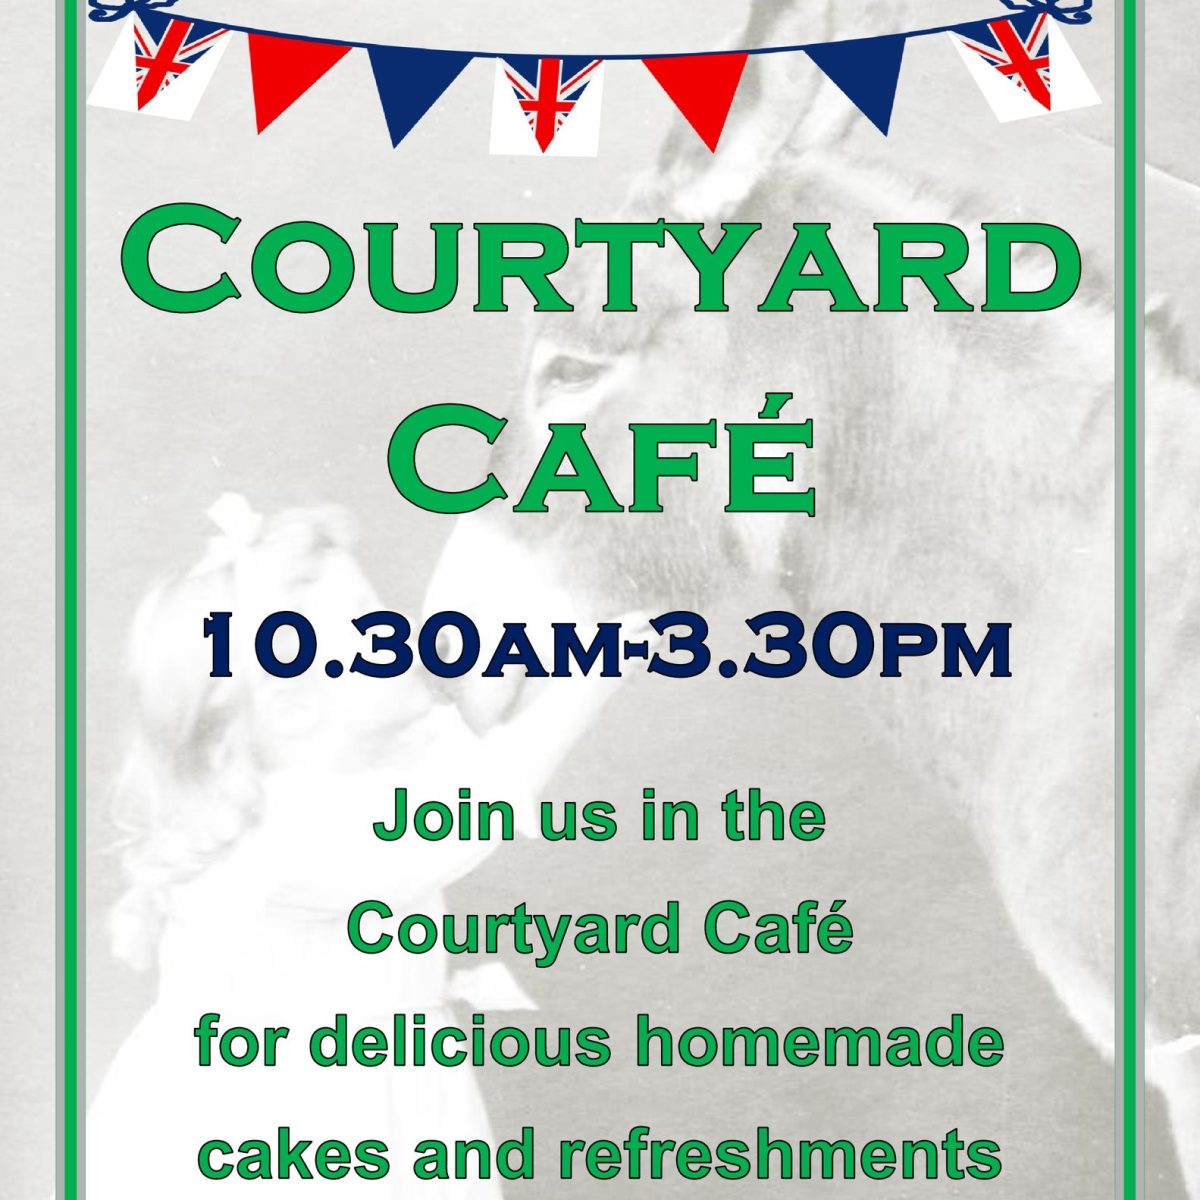 The Courtyard Café will soon be open. #woodhall1940sfestival #